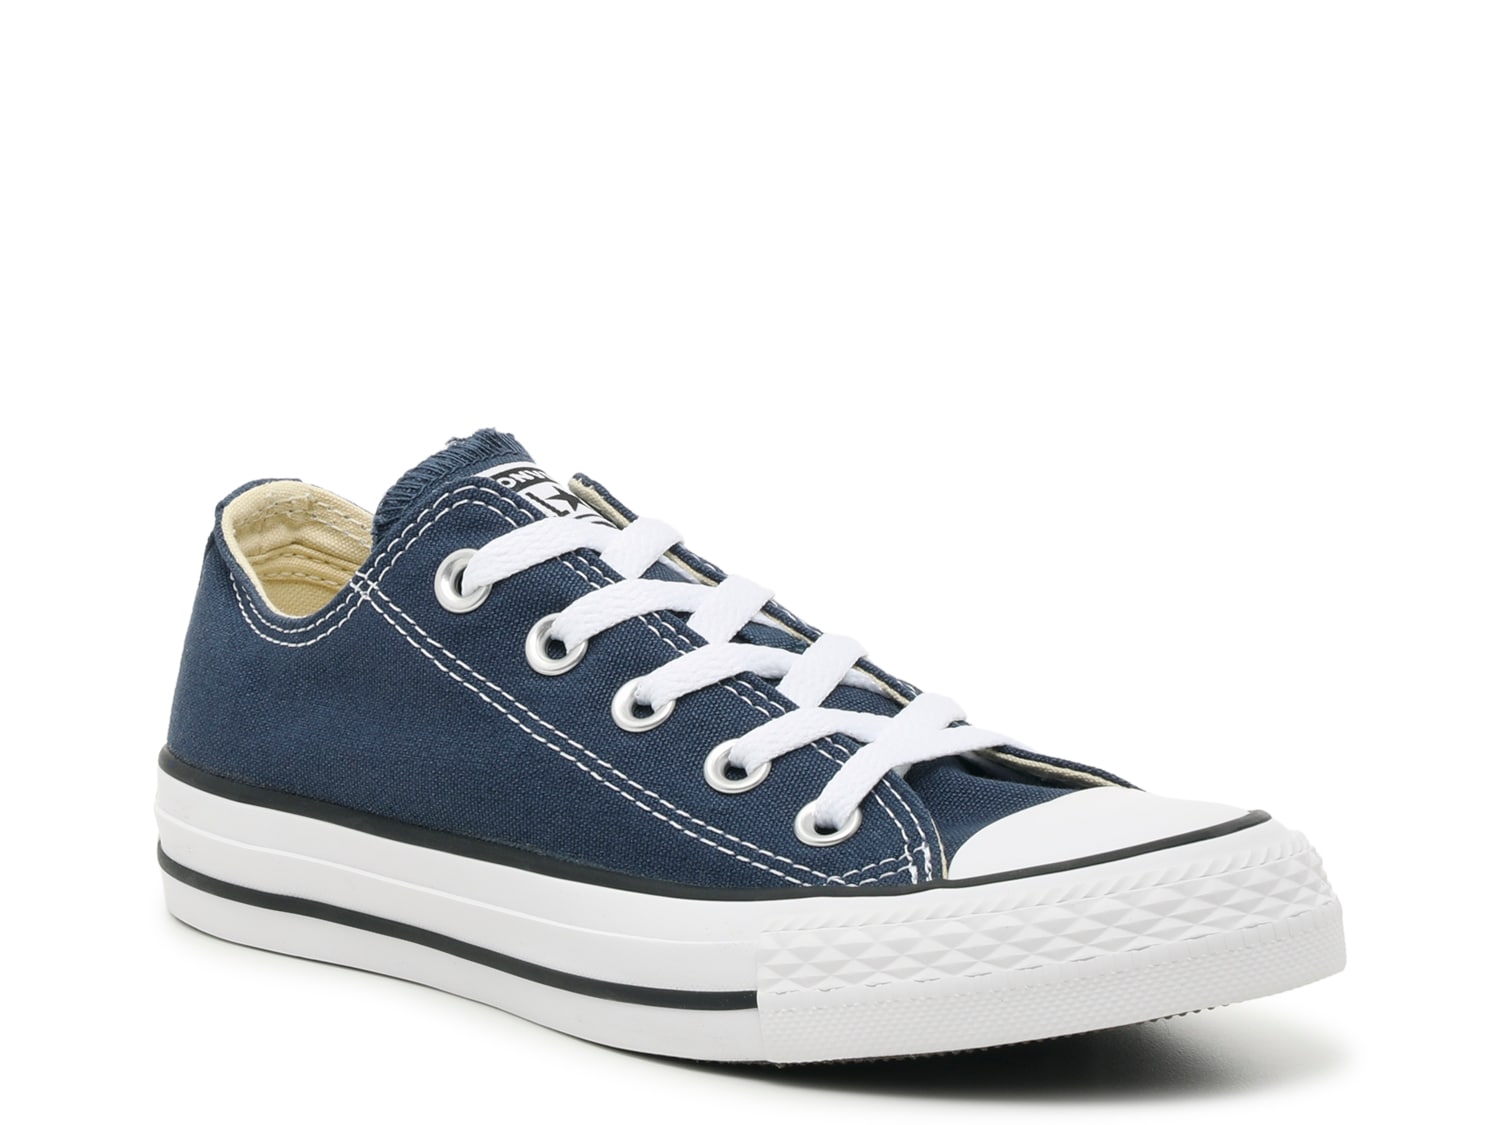 Minister overlap suffix Converse Chuck Taylor All Star Low-Top Sneaker - Men's - Free Shipping | DSW